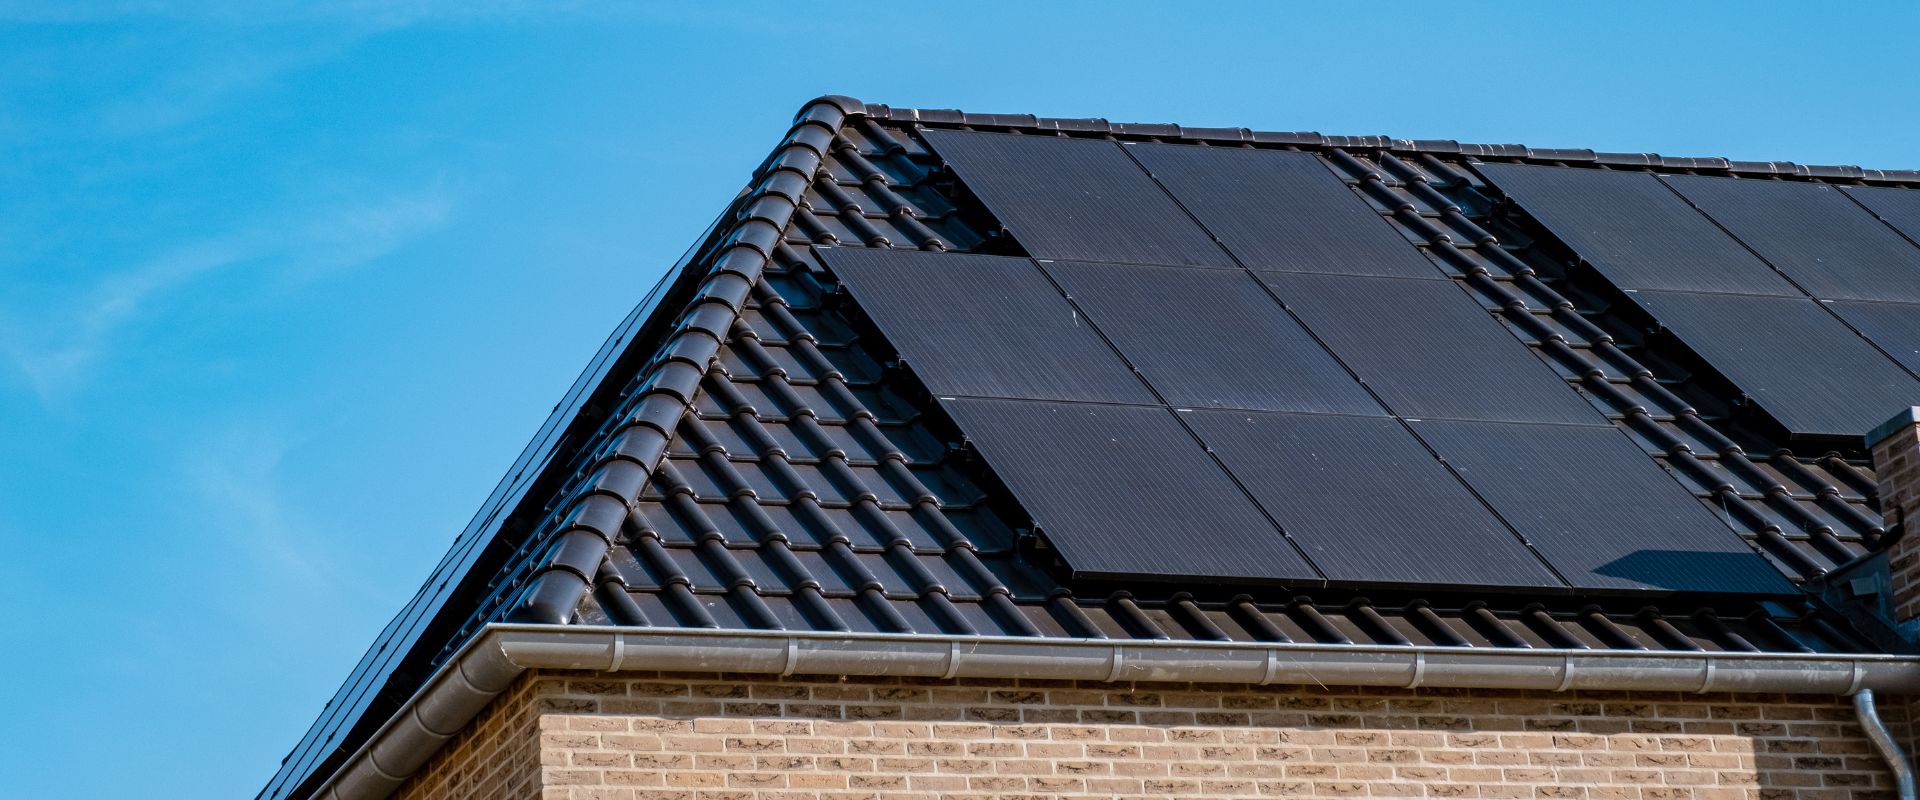 black solar panels on a house rooftop